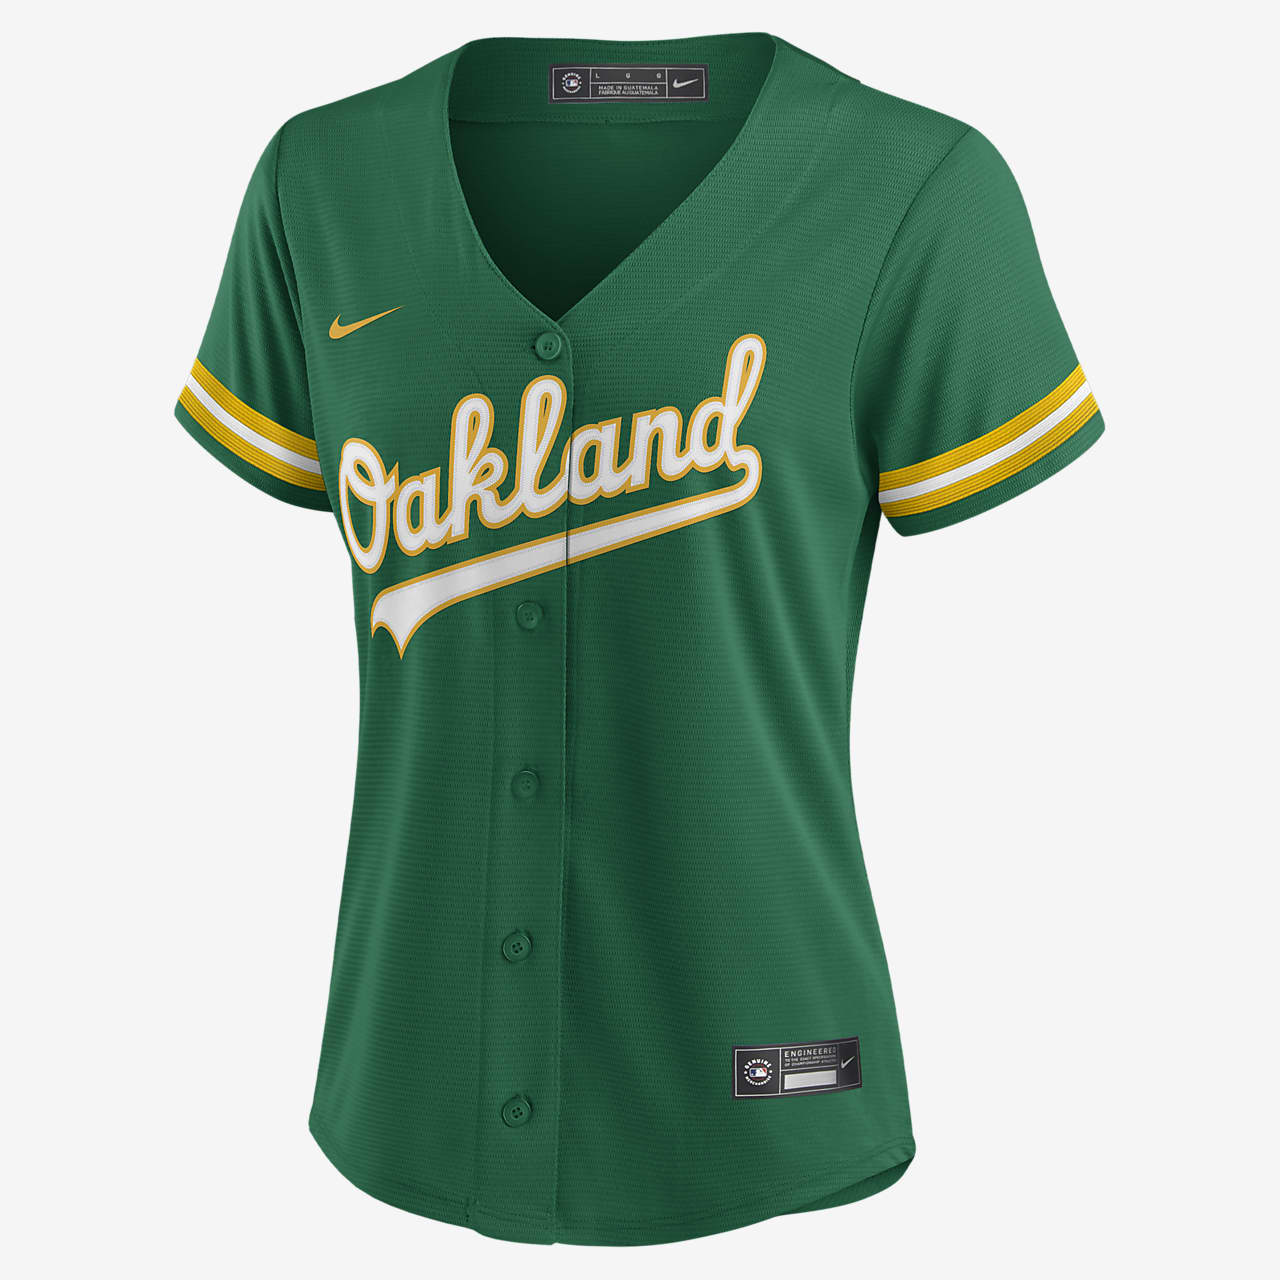 Oakland A's Athletics Blank Game Issued Dark Green Jersey MLB 150